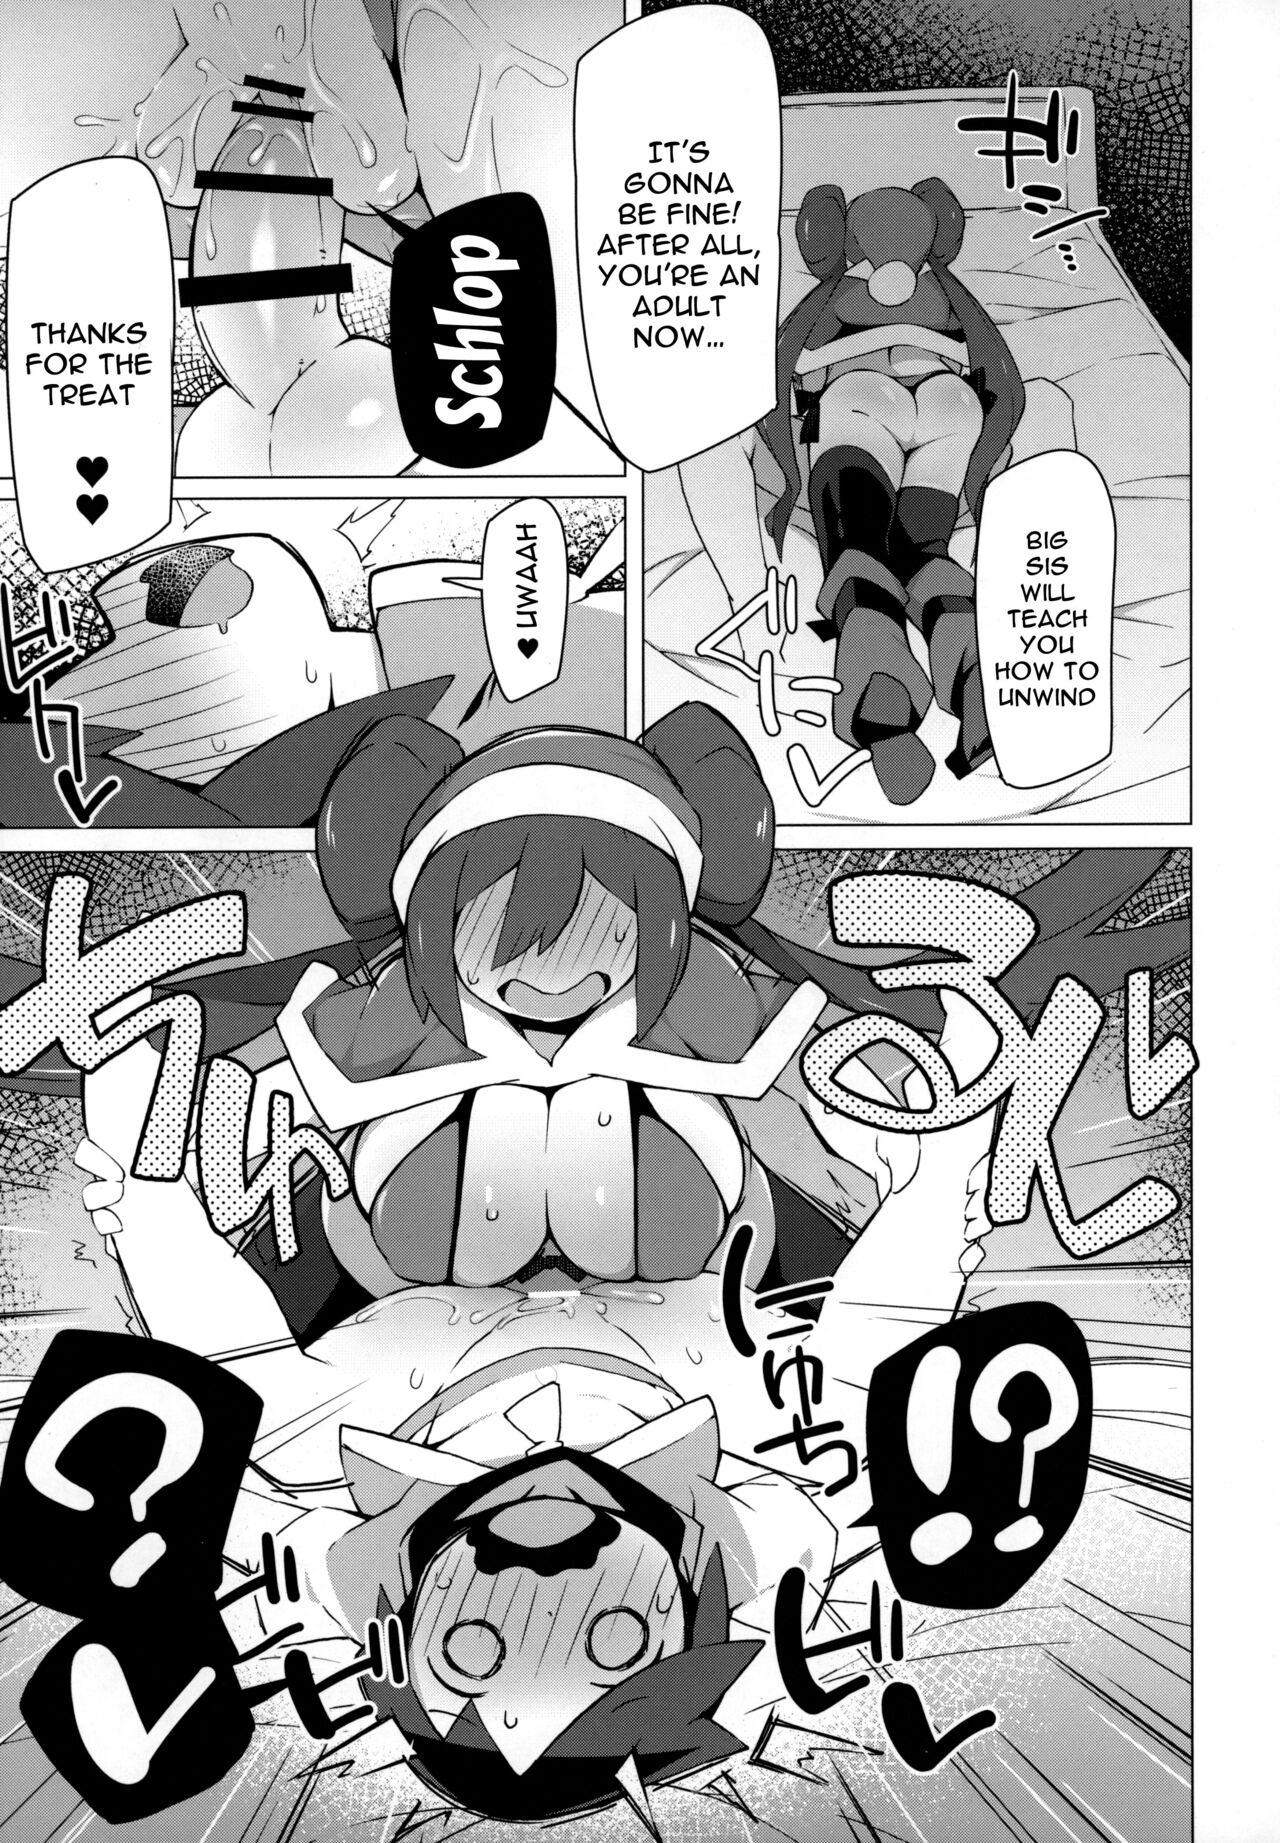 Maledom Marushii 2 - Pokemon | pocket monsters Perfect Tits - Page 6